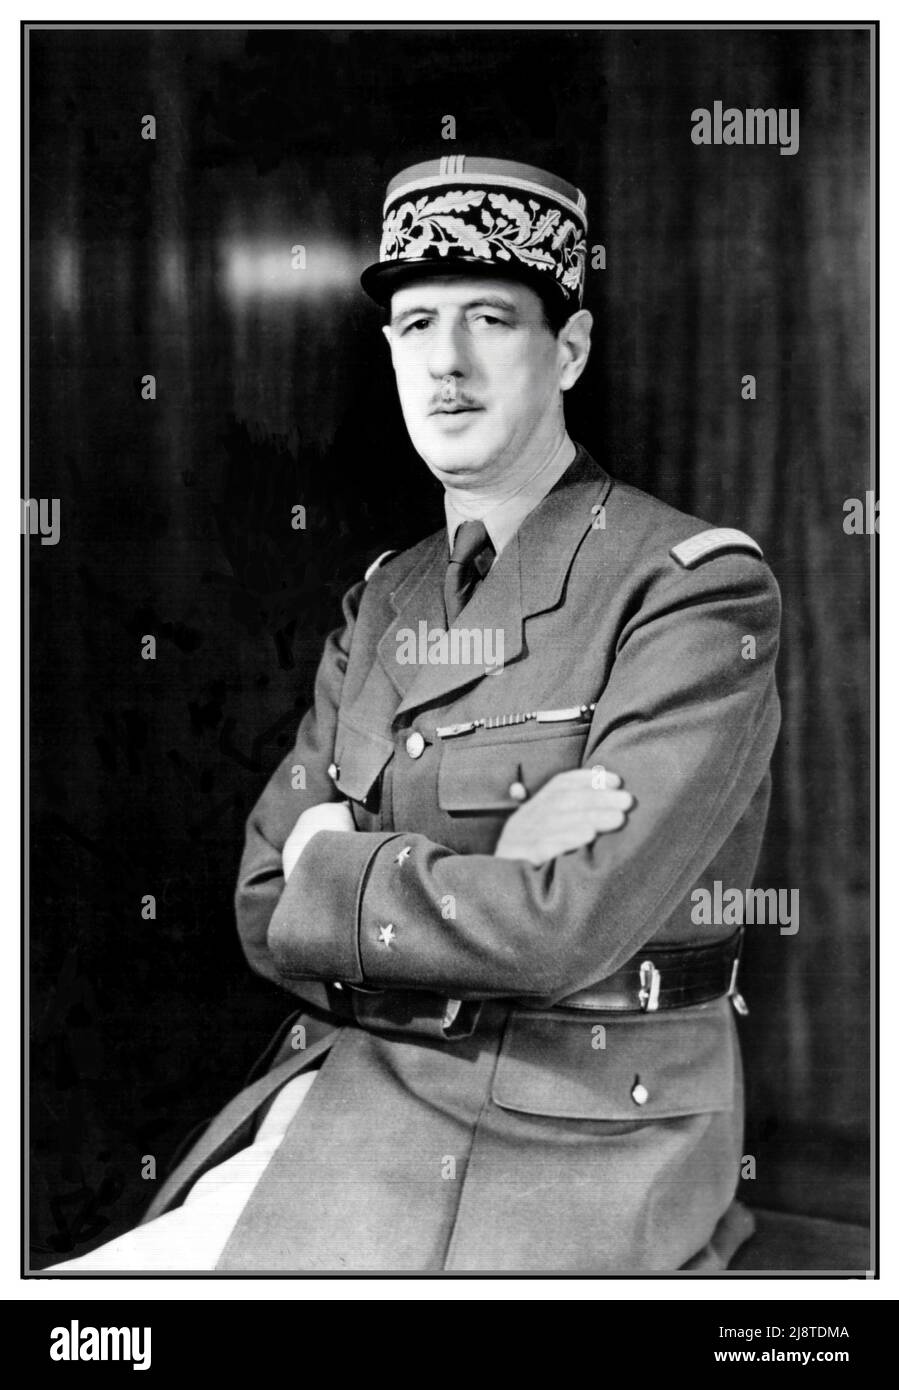 WW2 French General Charles De Gaulle formal portrait in military uniform and cap. A WWII photo portrait of General Charles de Gaulle of the Free French Forces and first president of the Fifth Republic serving from 1959 to 1969. Date circa 1942 World War II Second World War Stock Photo